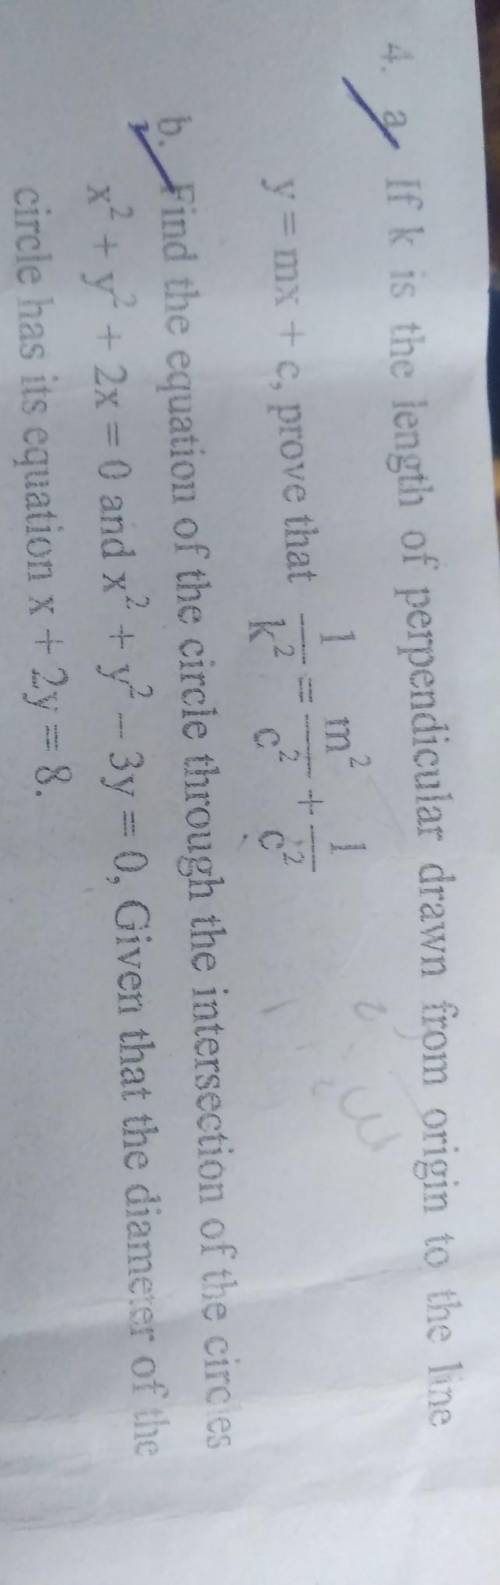 Plse help me with this 2 questions its urgentWill thank you